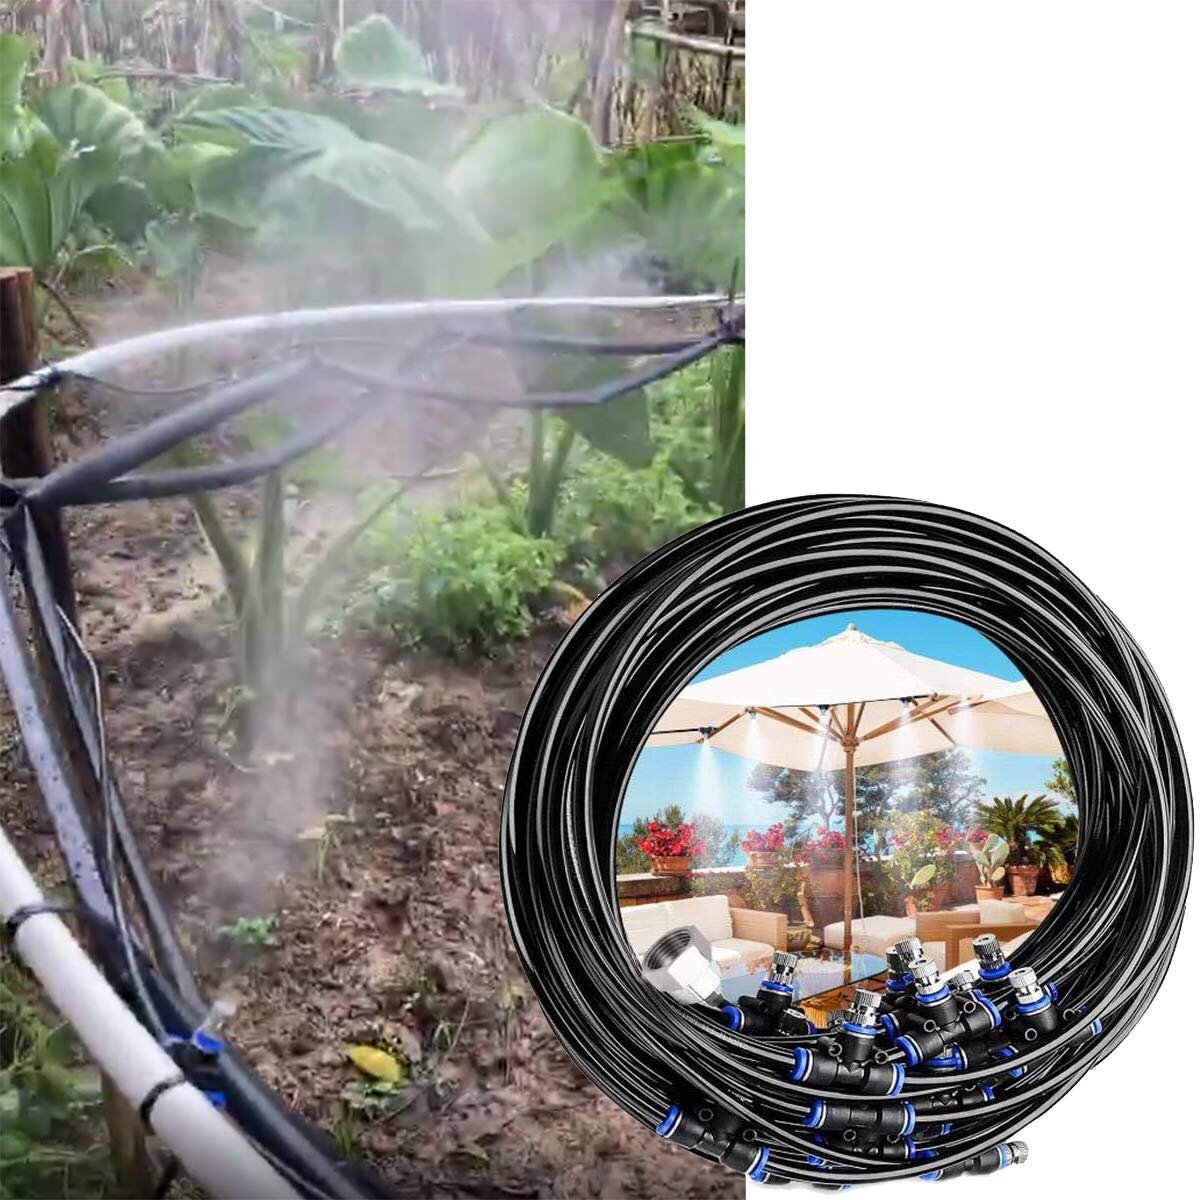 

20m Garden Watering Irrigation Spraying Kit Outdoor Cooling System Dust Collect Air Humidification